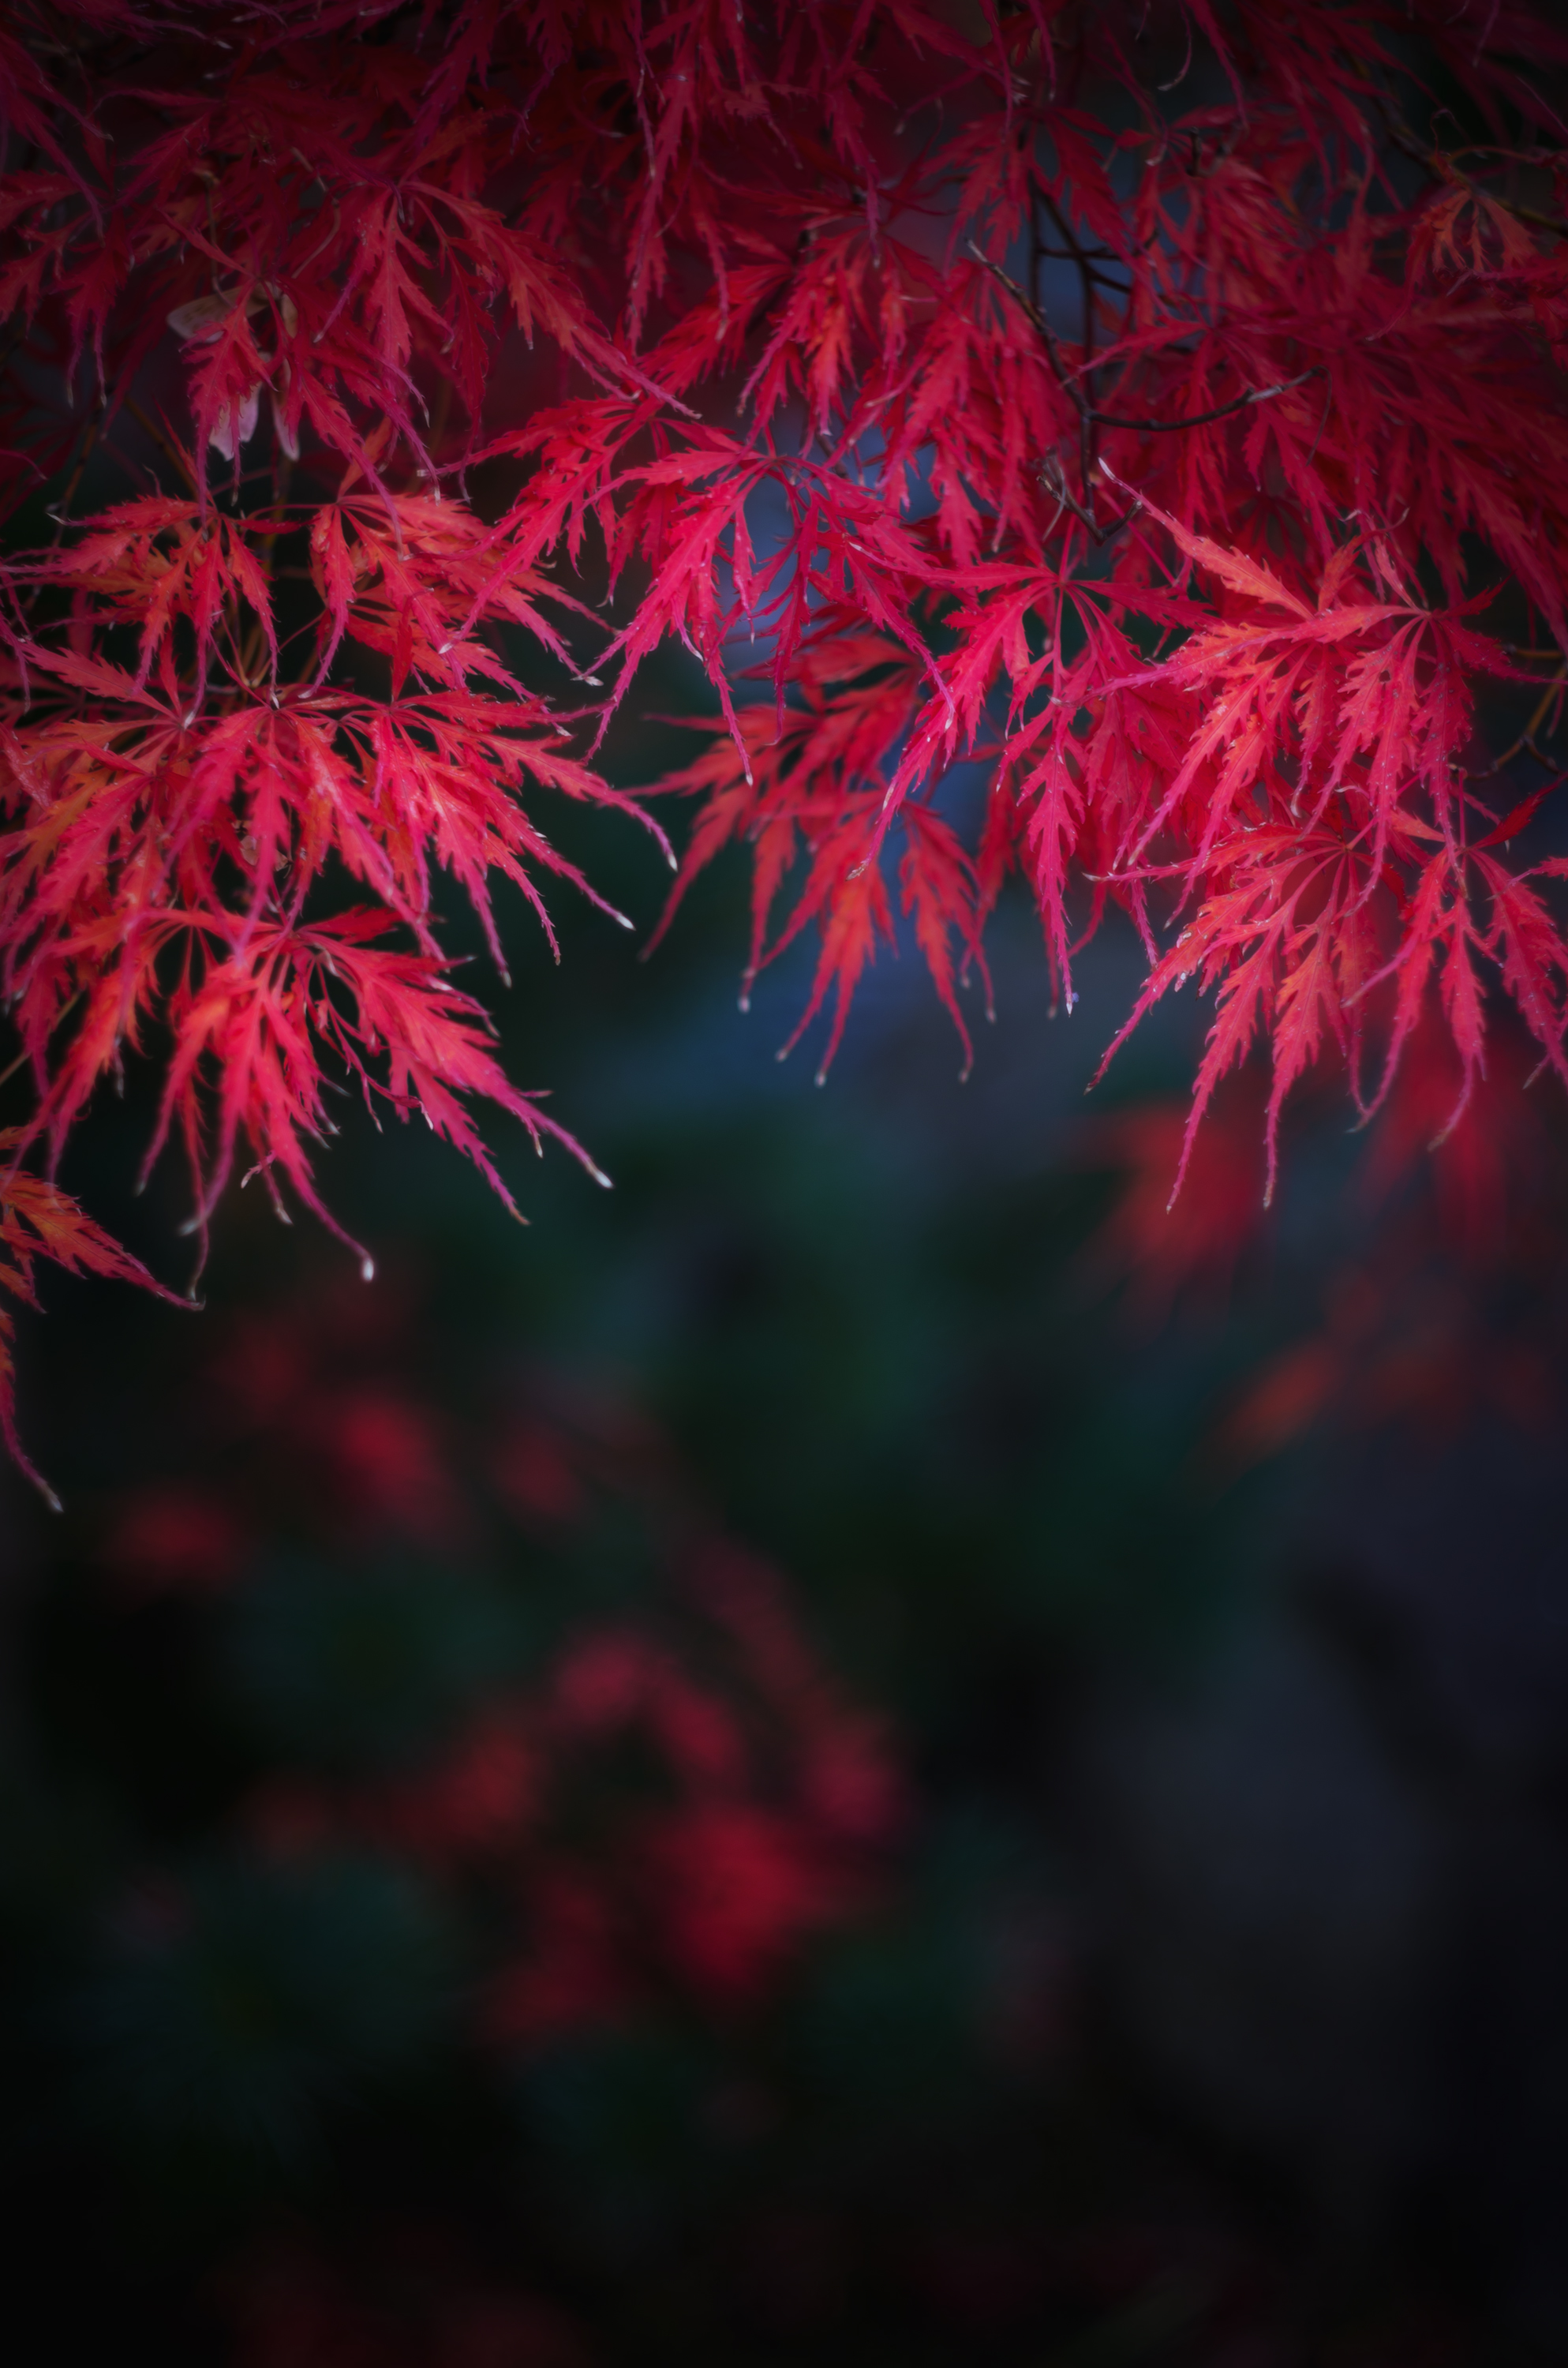 Free HD leaves, autumn, nature, red, branches